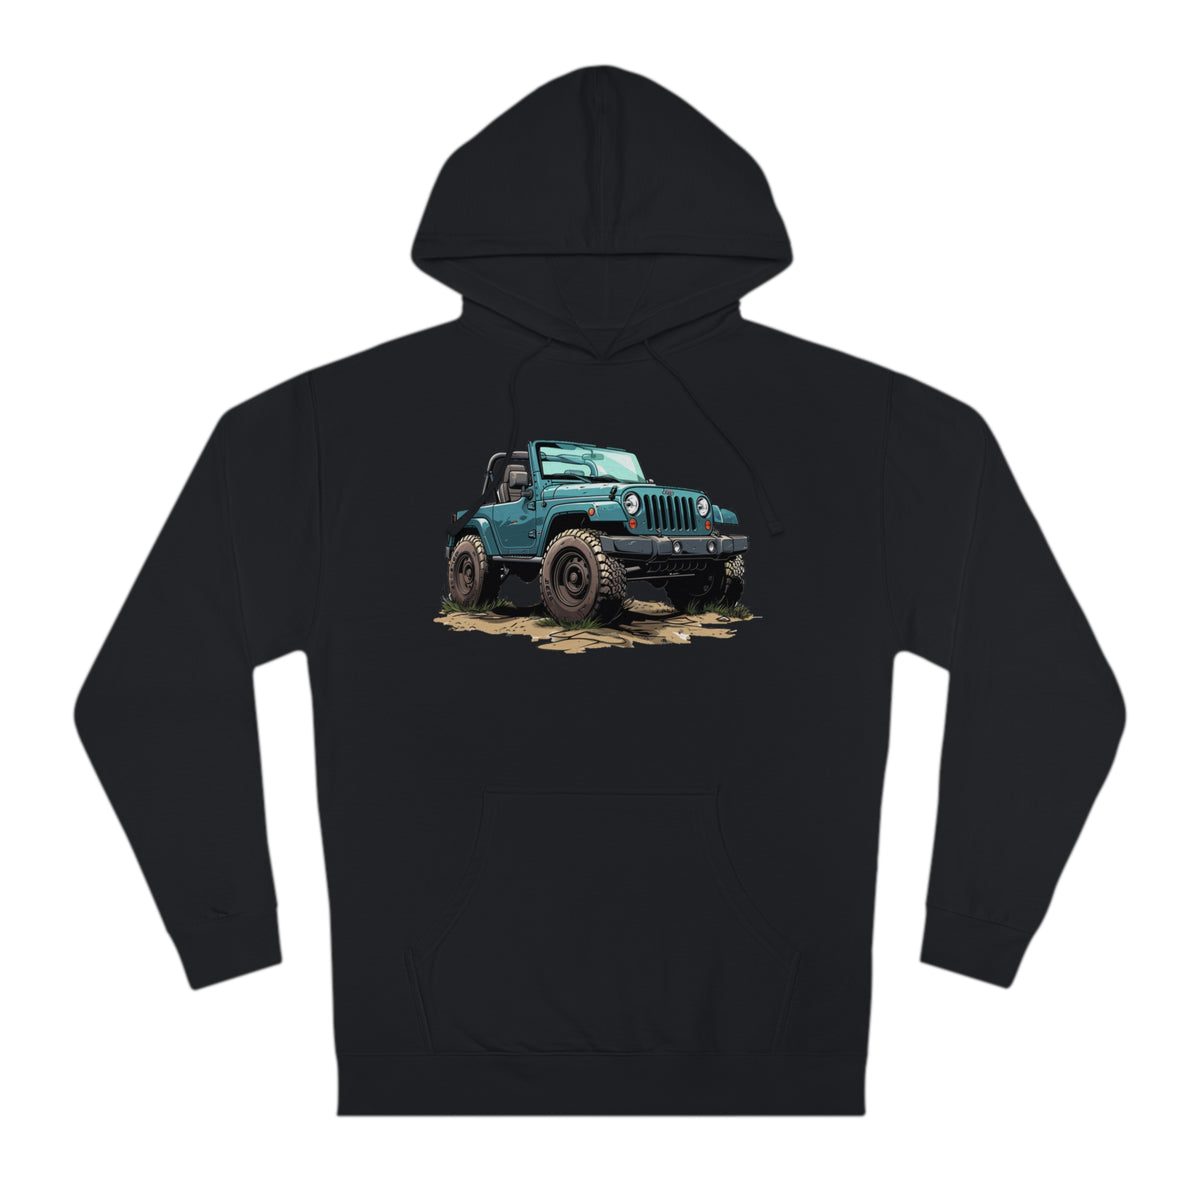 Trail Conqueror Men's Hoodie with Open-Top Jeep Graphic Hooded Sweatshirt